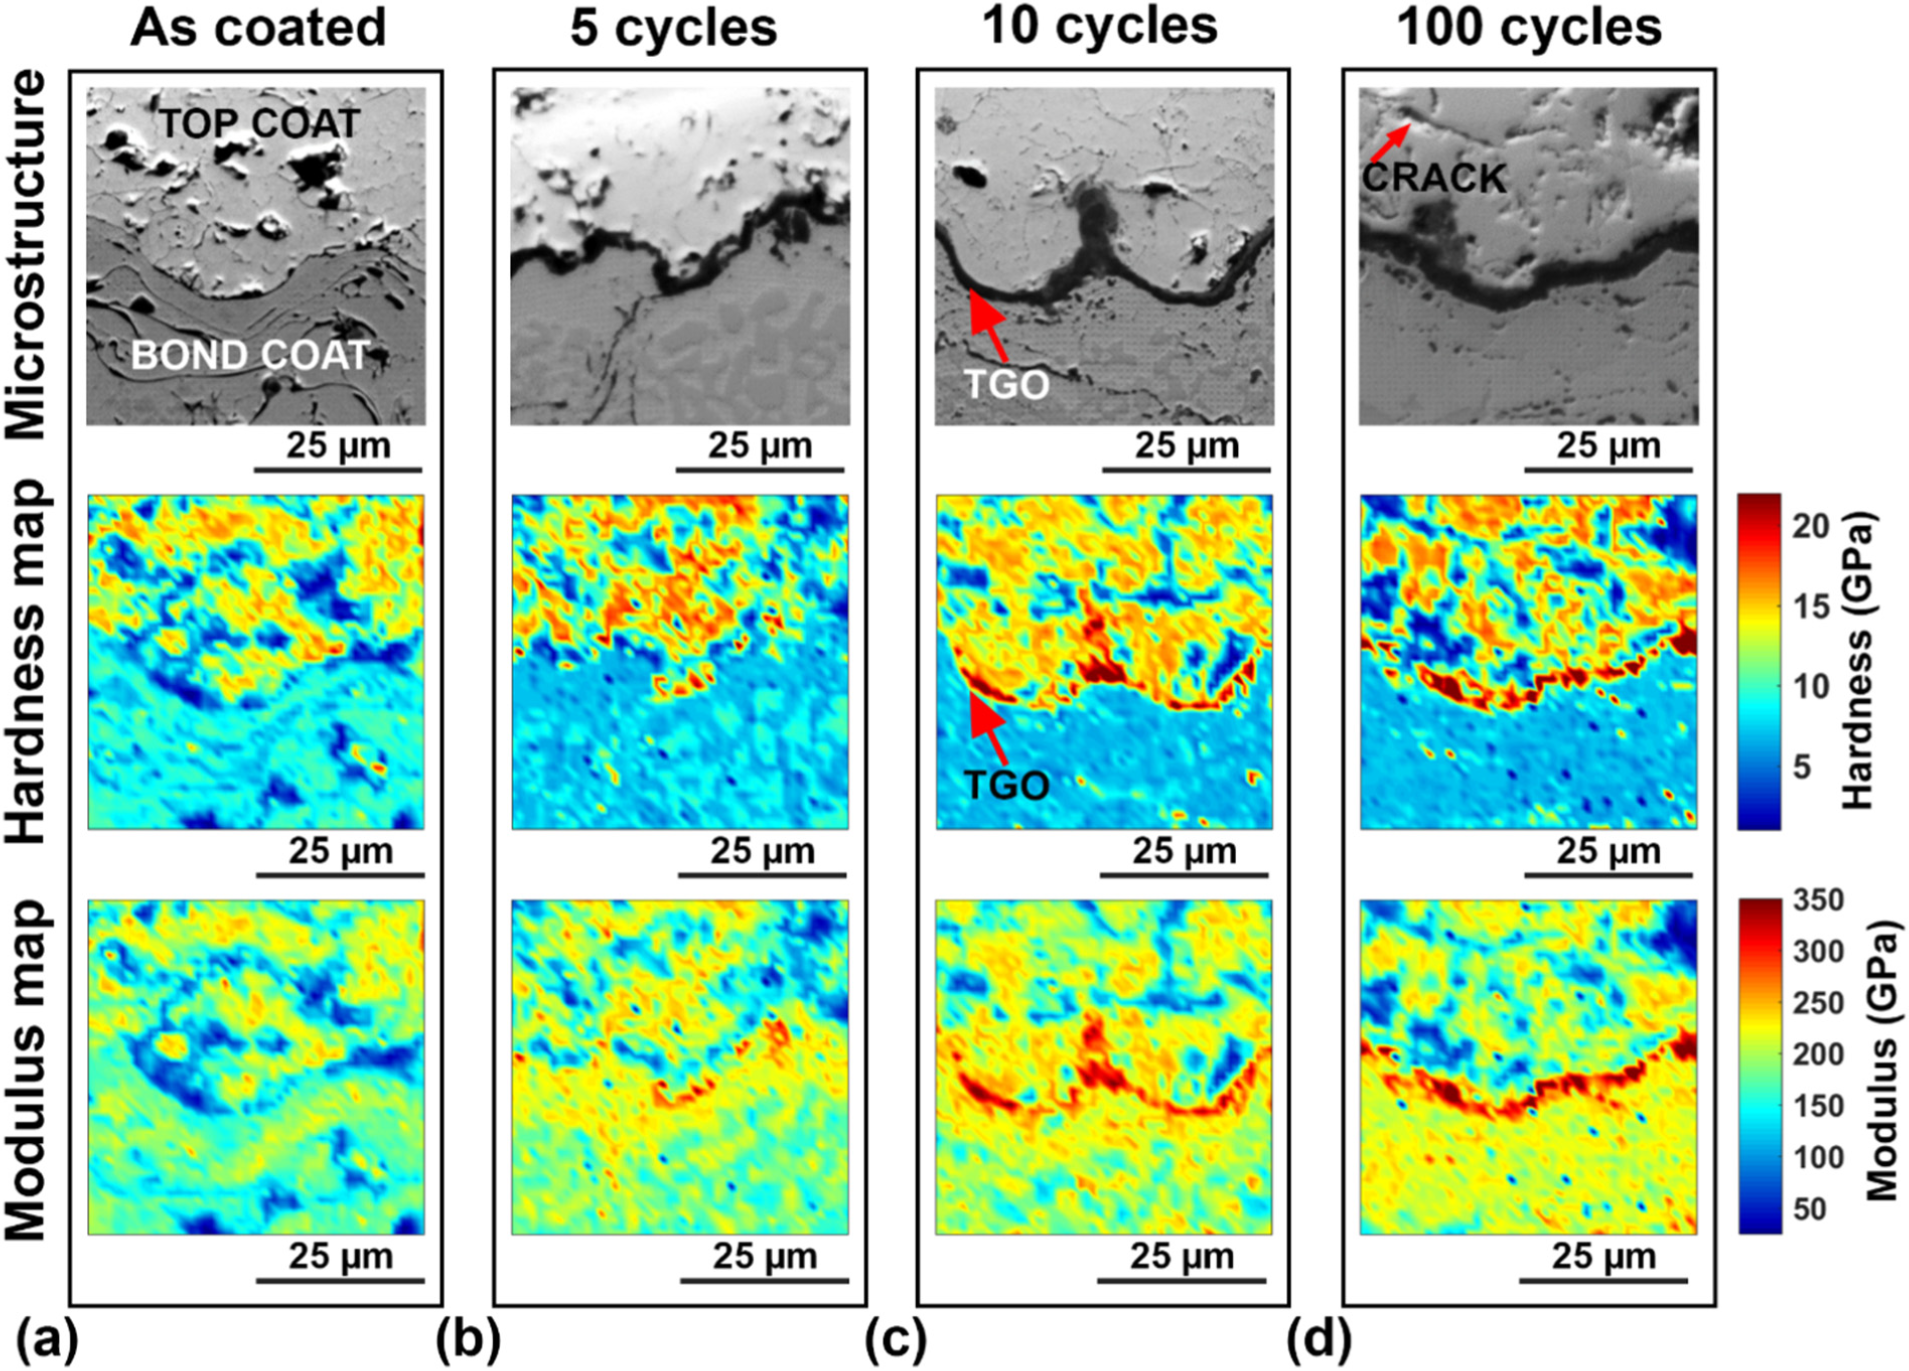 Cross-sectional SEM micrographs and the corresponding hardness and elastic modulus maps at the bond coat-top coat interface show TGO growth for (a, first column) the as-coated state; (b, second column) after 5 thermal cycles; (c, third column) after 10 thermal cycles; and (d, fourth column) after 100 thermal cycles.